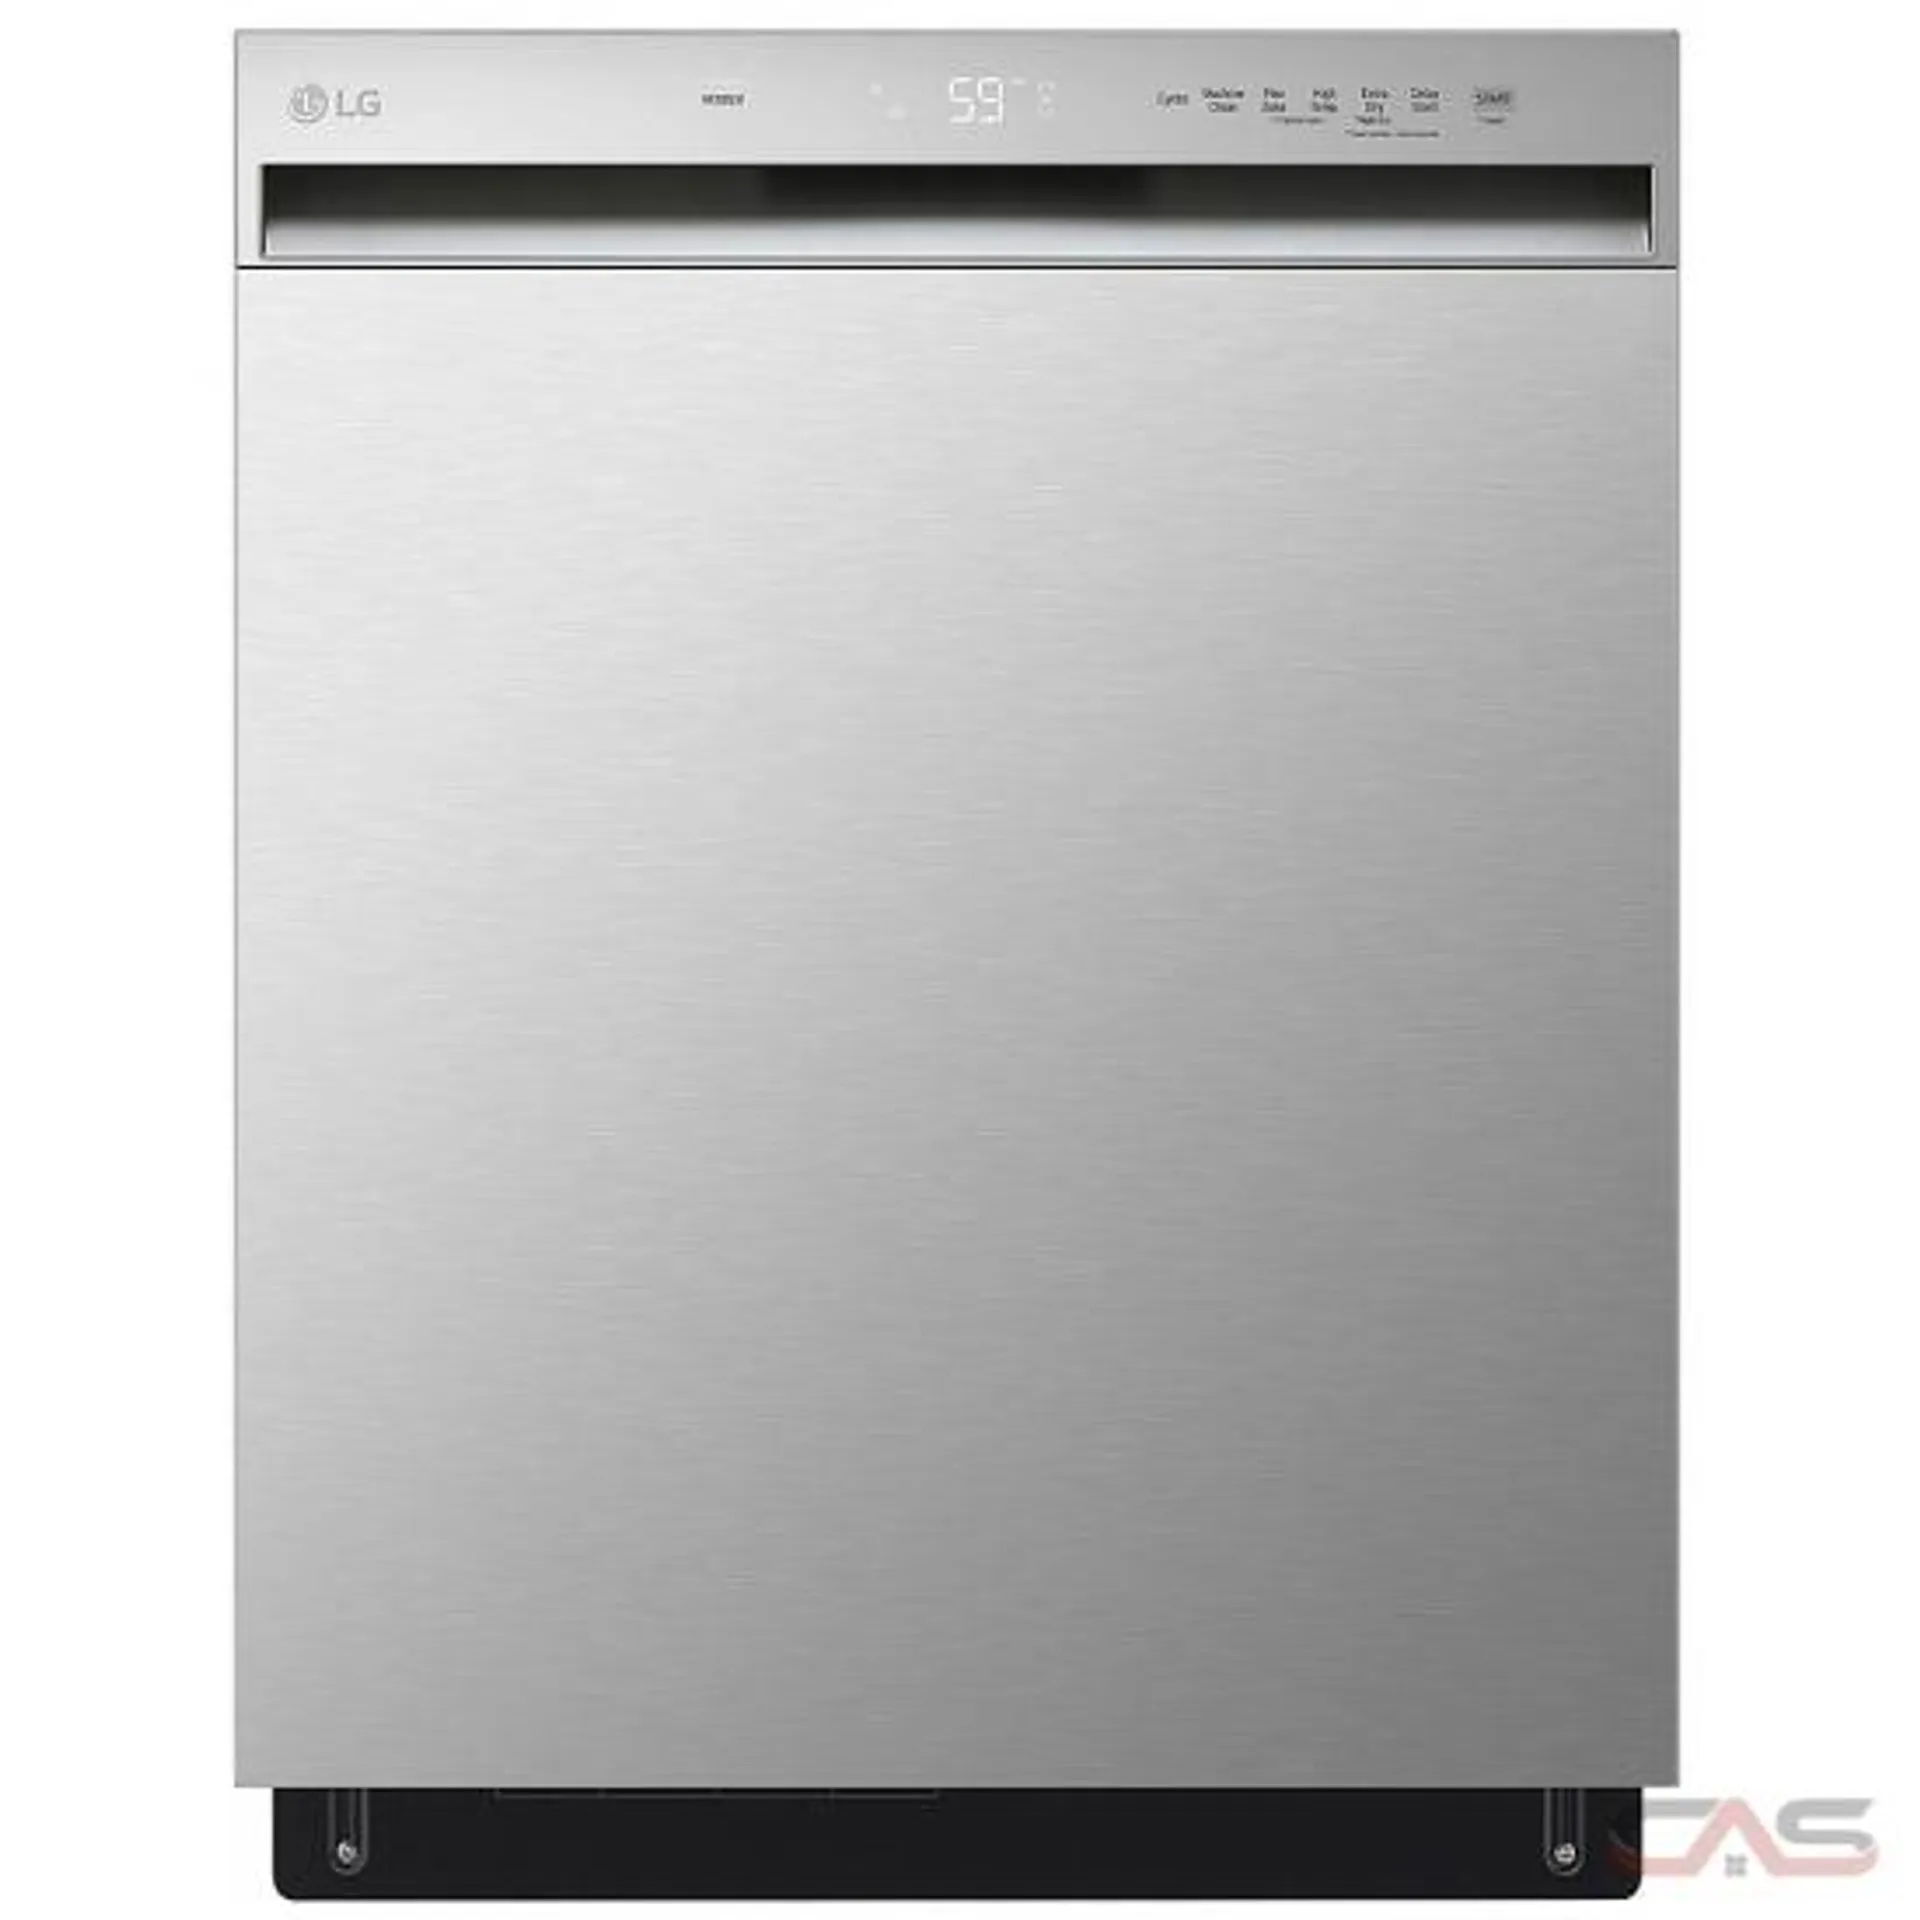 LG LDFN3432T Dishwasher, 24 inch Exterior Width, 50 dB Decibel Level, Full Console, Stainless Steel (Interior), 5 Wash Cycles, 15 Capacity (Place Settings), Stainless Steel colour QuadWash